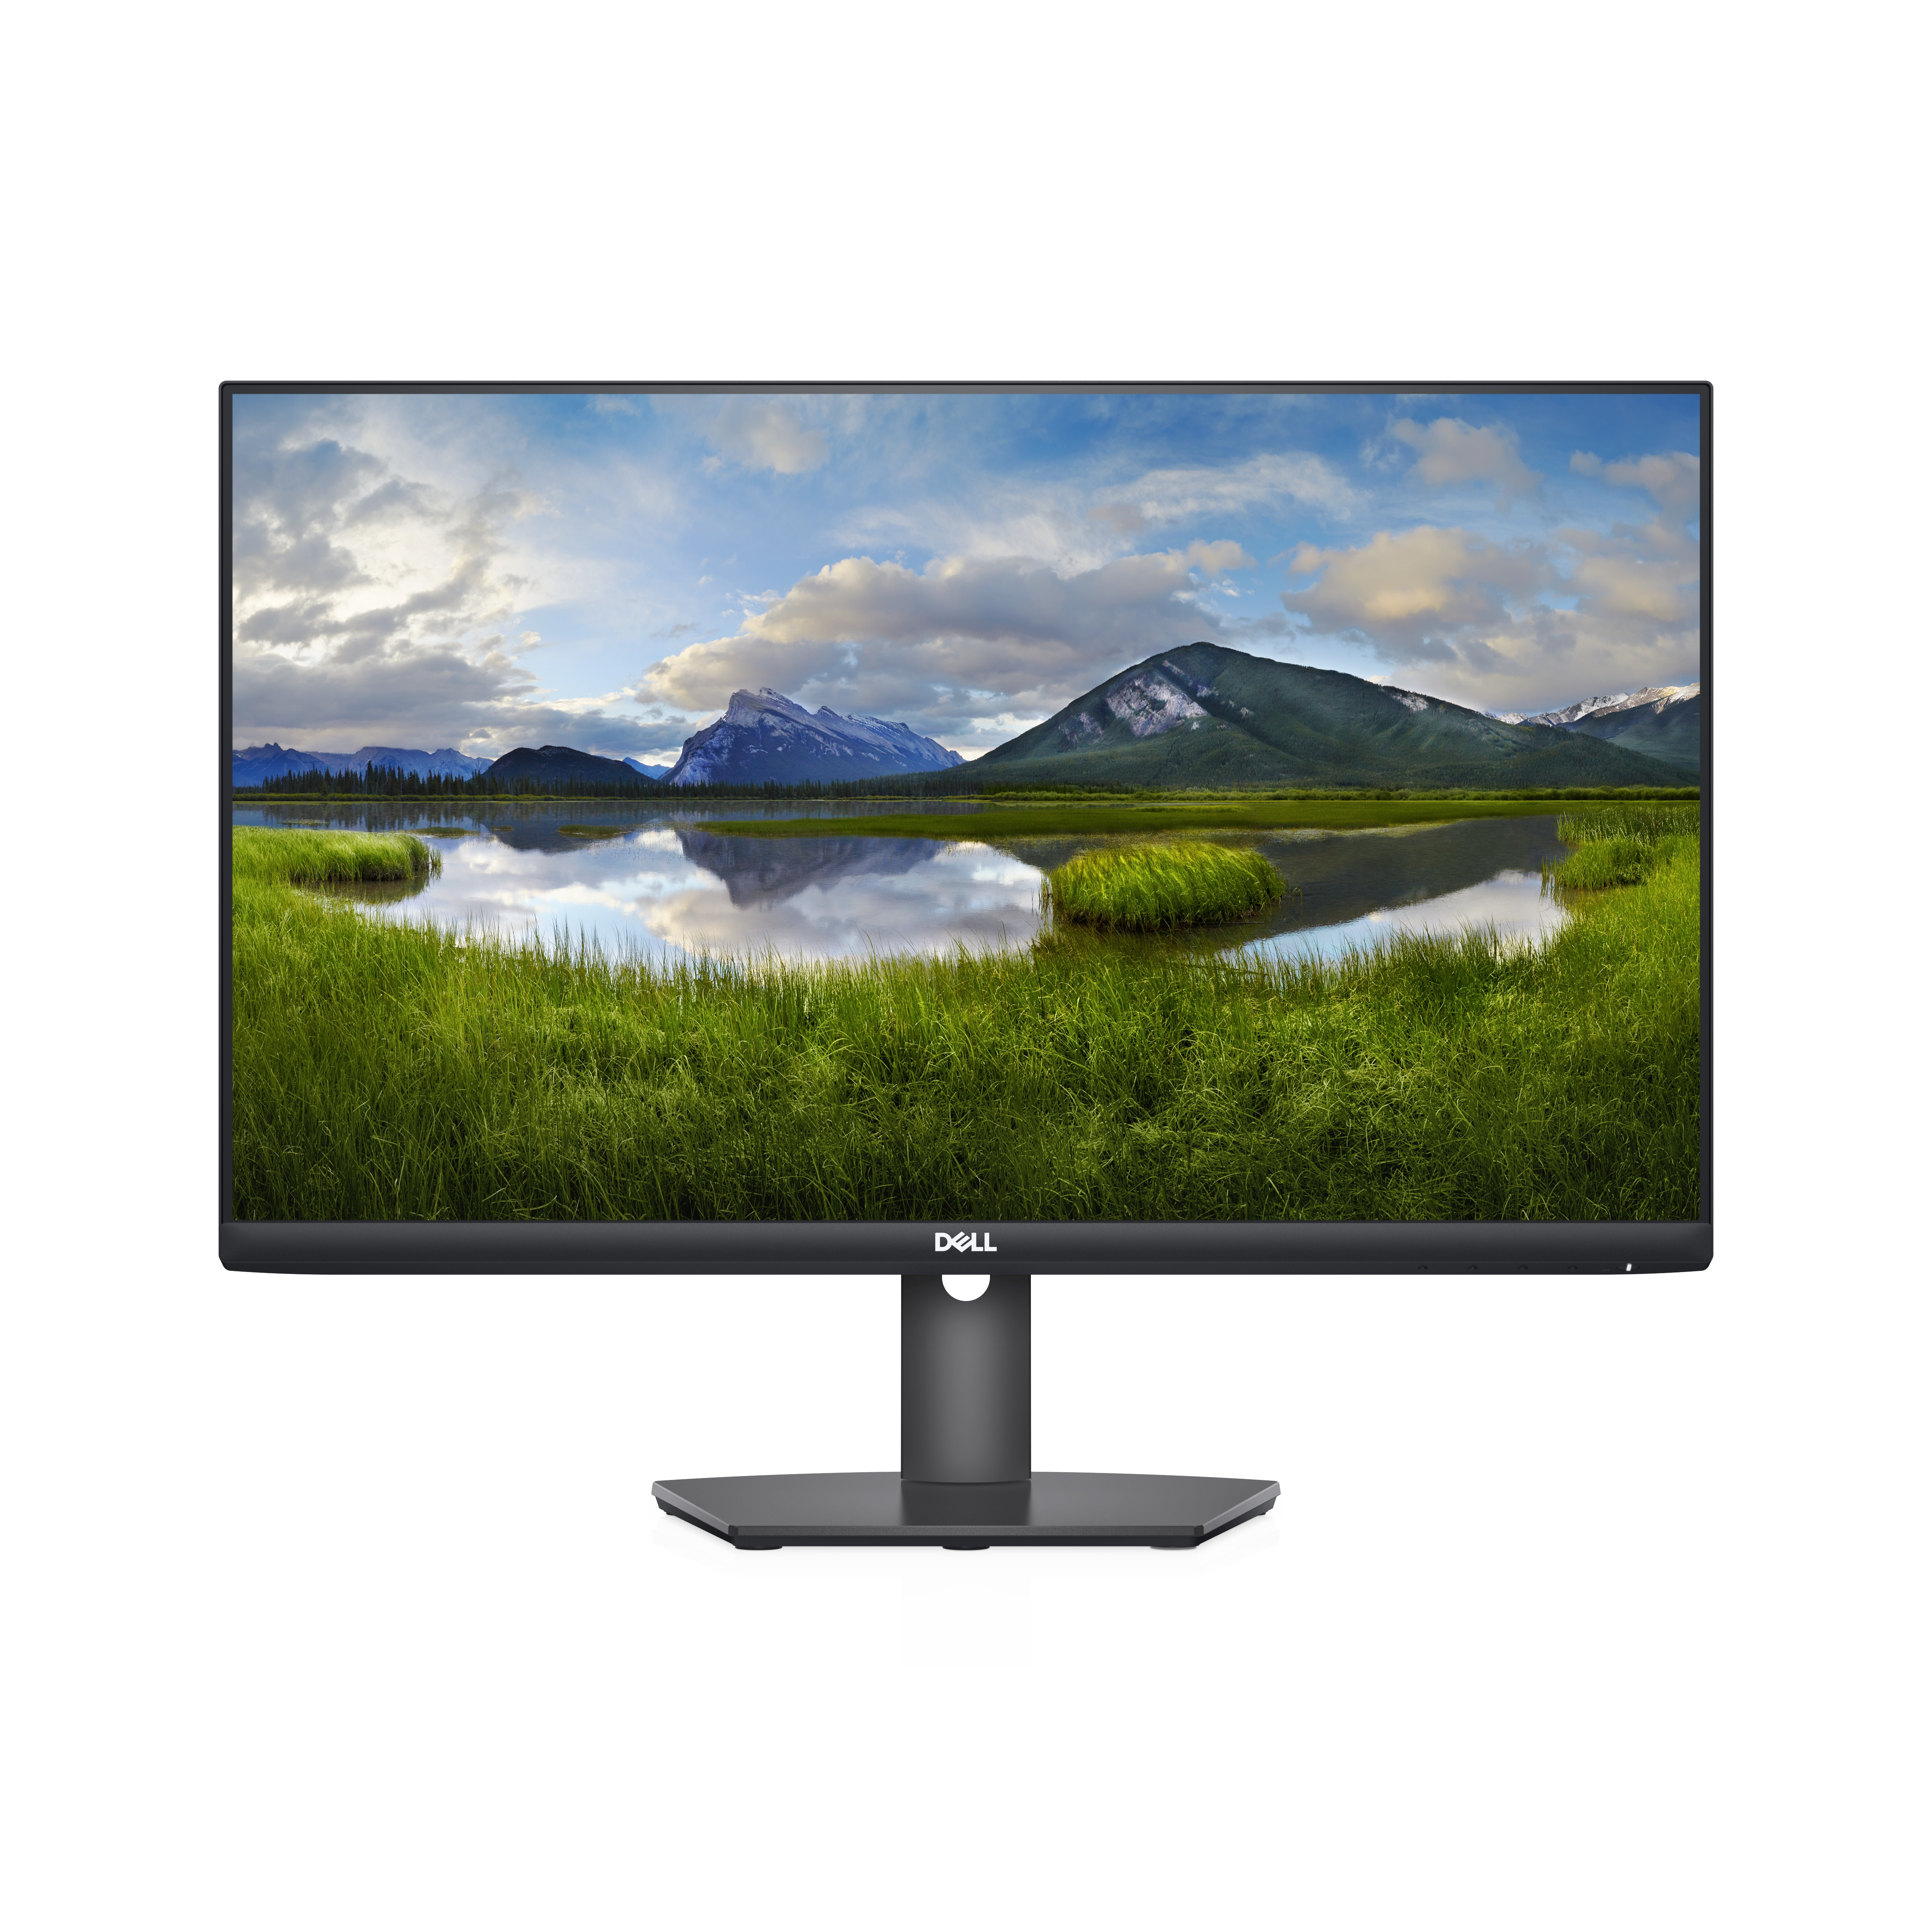 DELL S Series S2421HSX LED display